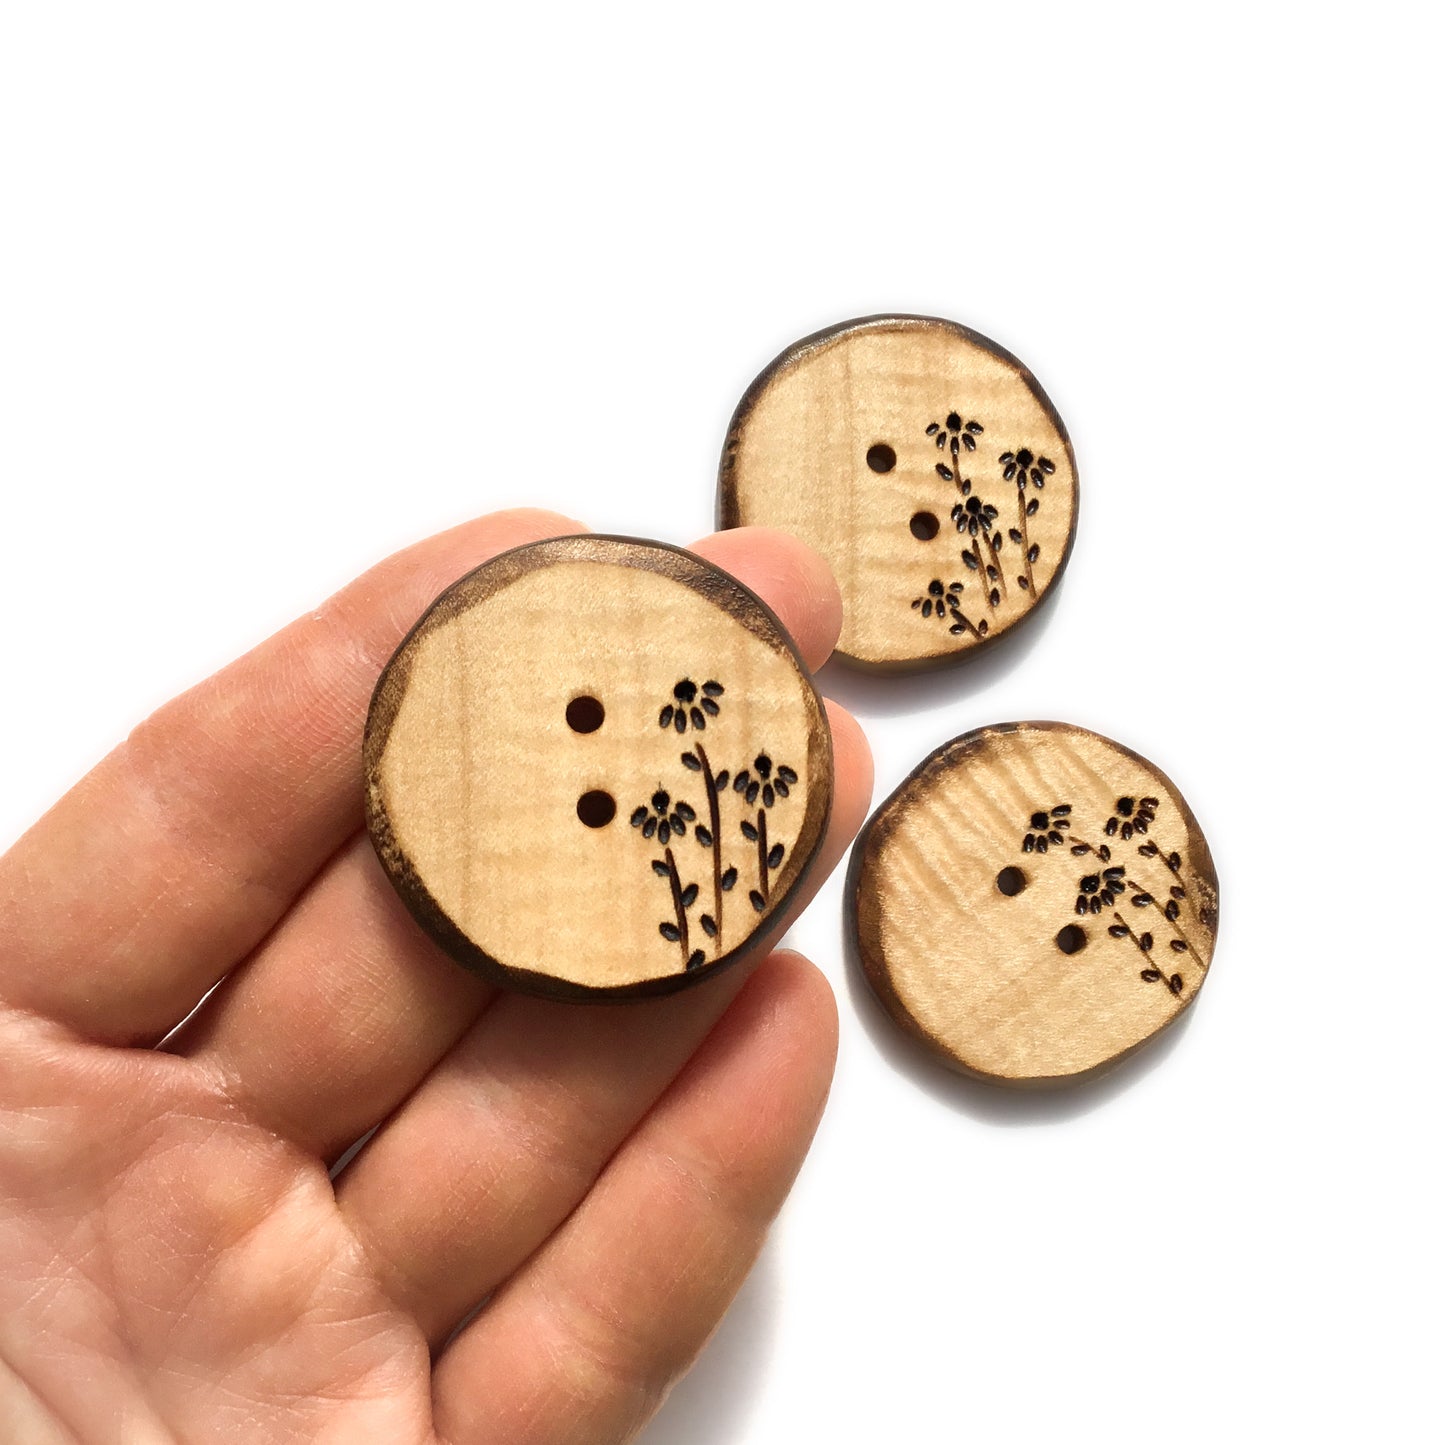 Wood Burned Coneflower Button in Maple  1-1/2”